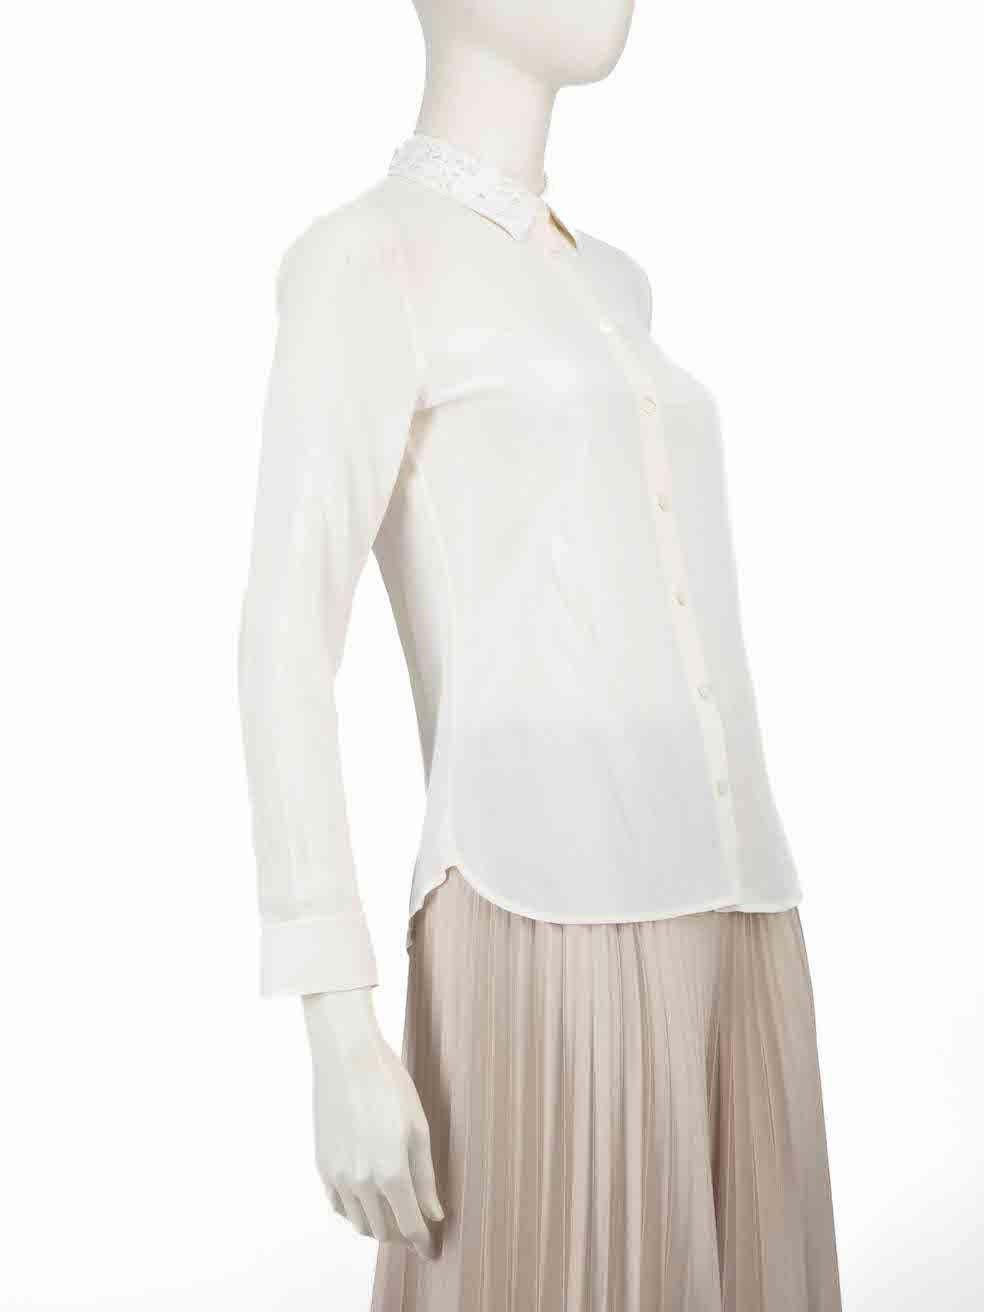 CONDITION is Very good. Hardly any visible wear to blouse is evident on this used Burberry designer resale item.
 
 
 
 Details
 
 
 White
 
 Silk
 
 Blouse
 
 Long sleeves
 
 Buttoned cuffs
 
 Button up fastening
 
 Sheer
 
 
 
 
 
 Made in China
